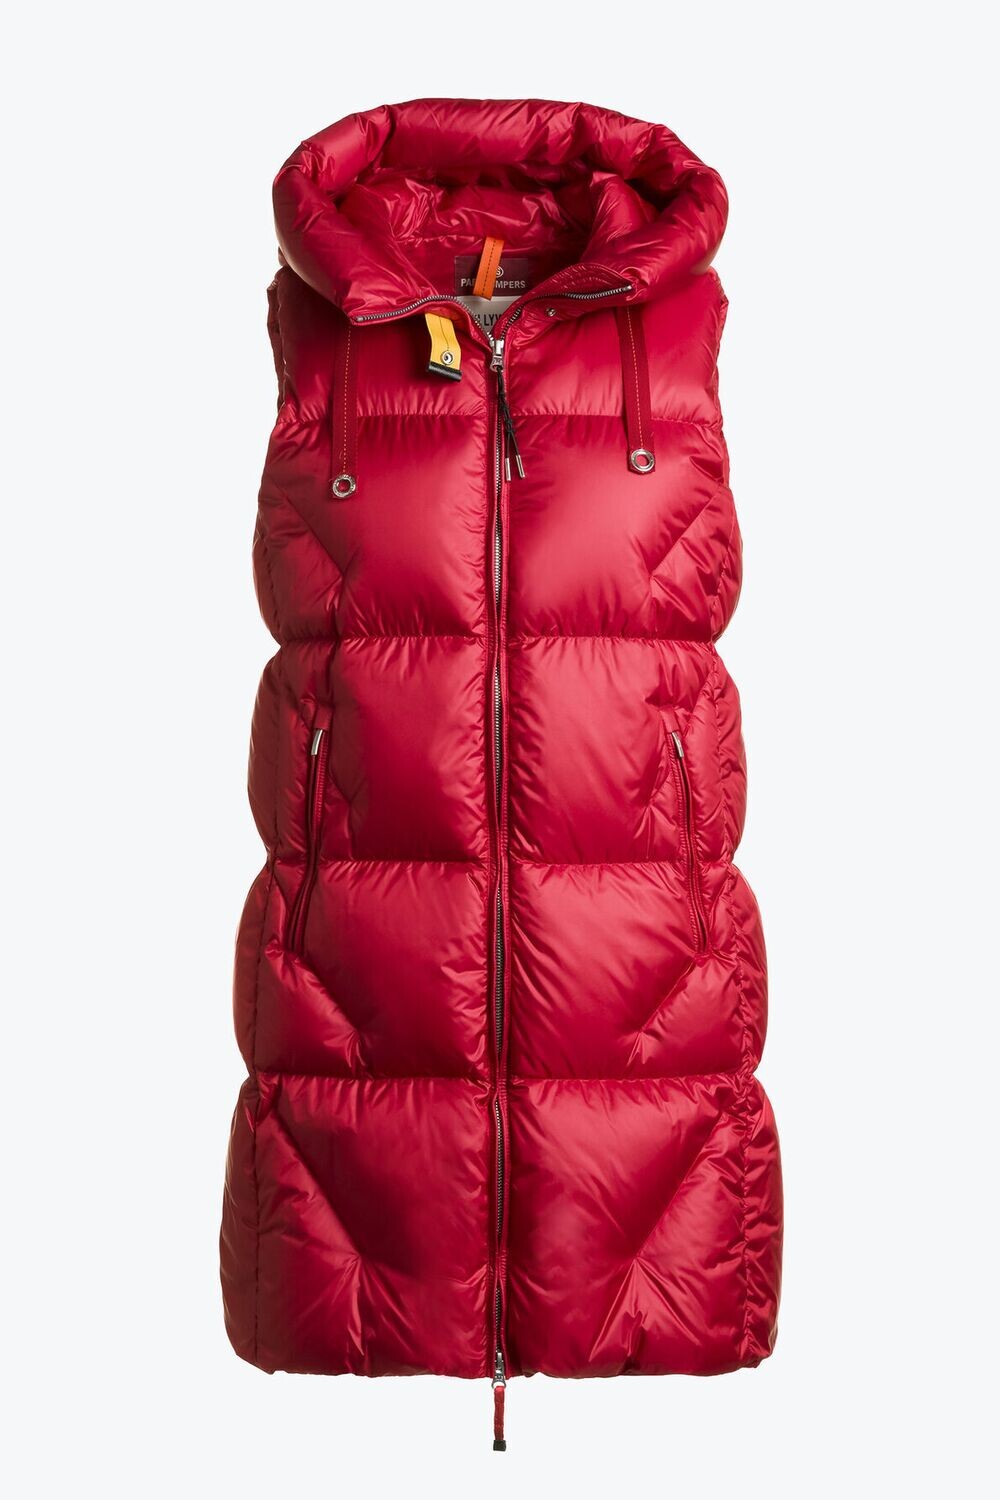 Parajumpers, Zuly Vest, Red